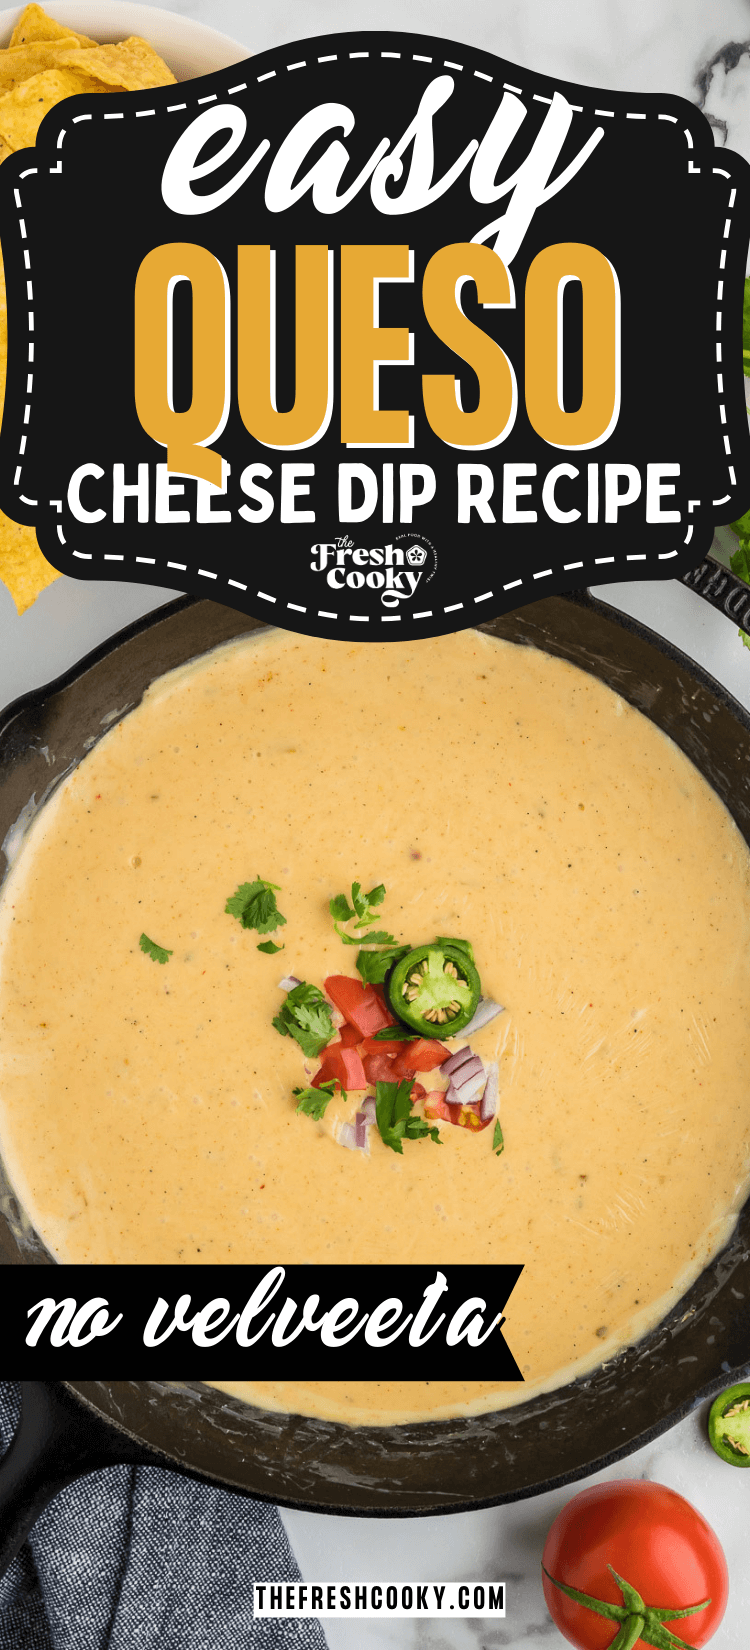 Easy Easy Queso Cheese Dip Recipe (without Velveeta) - The Fresh Cooky